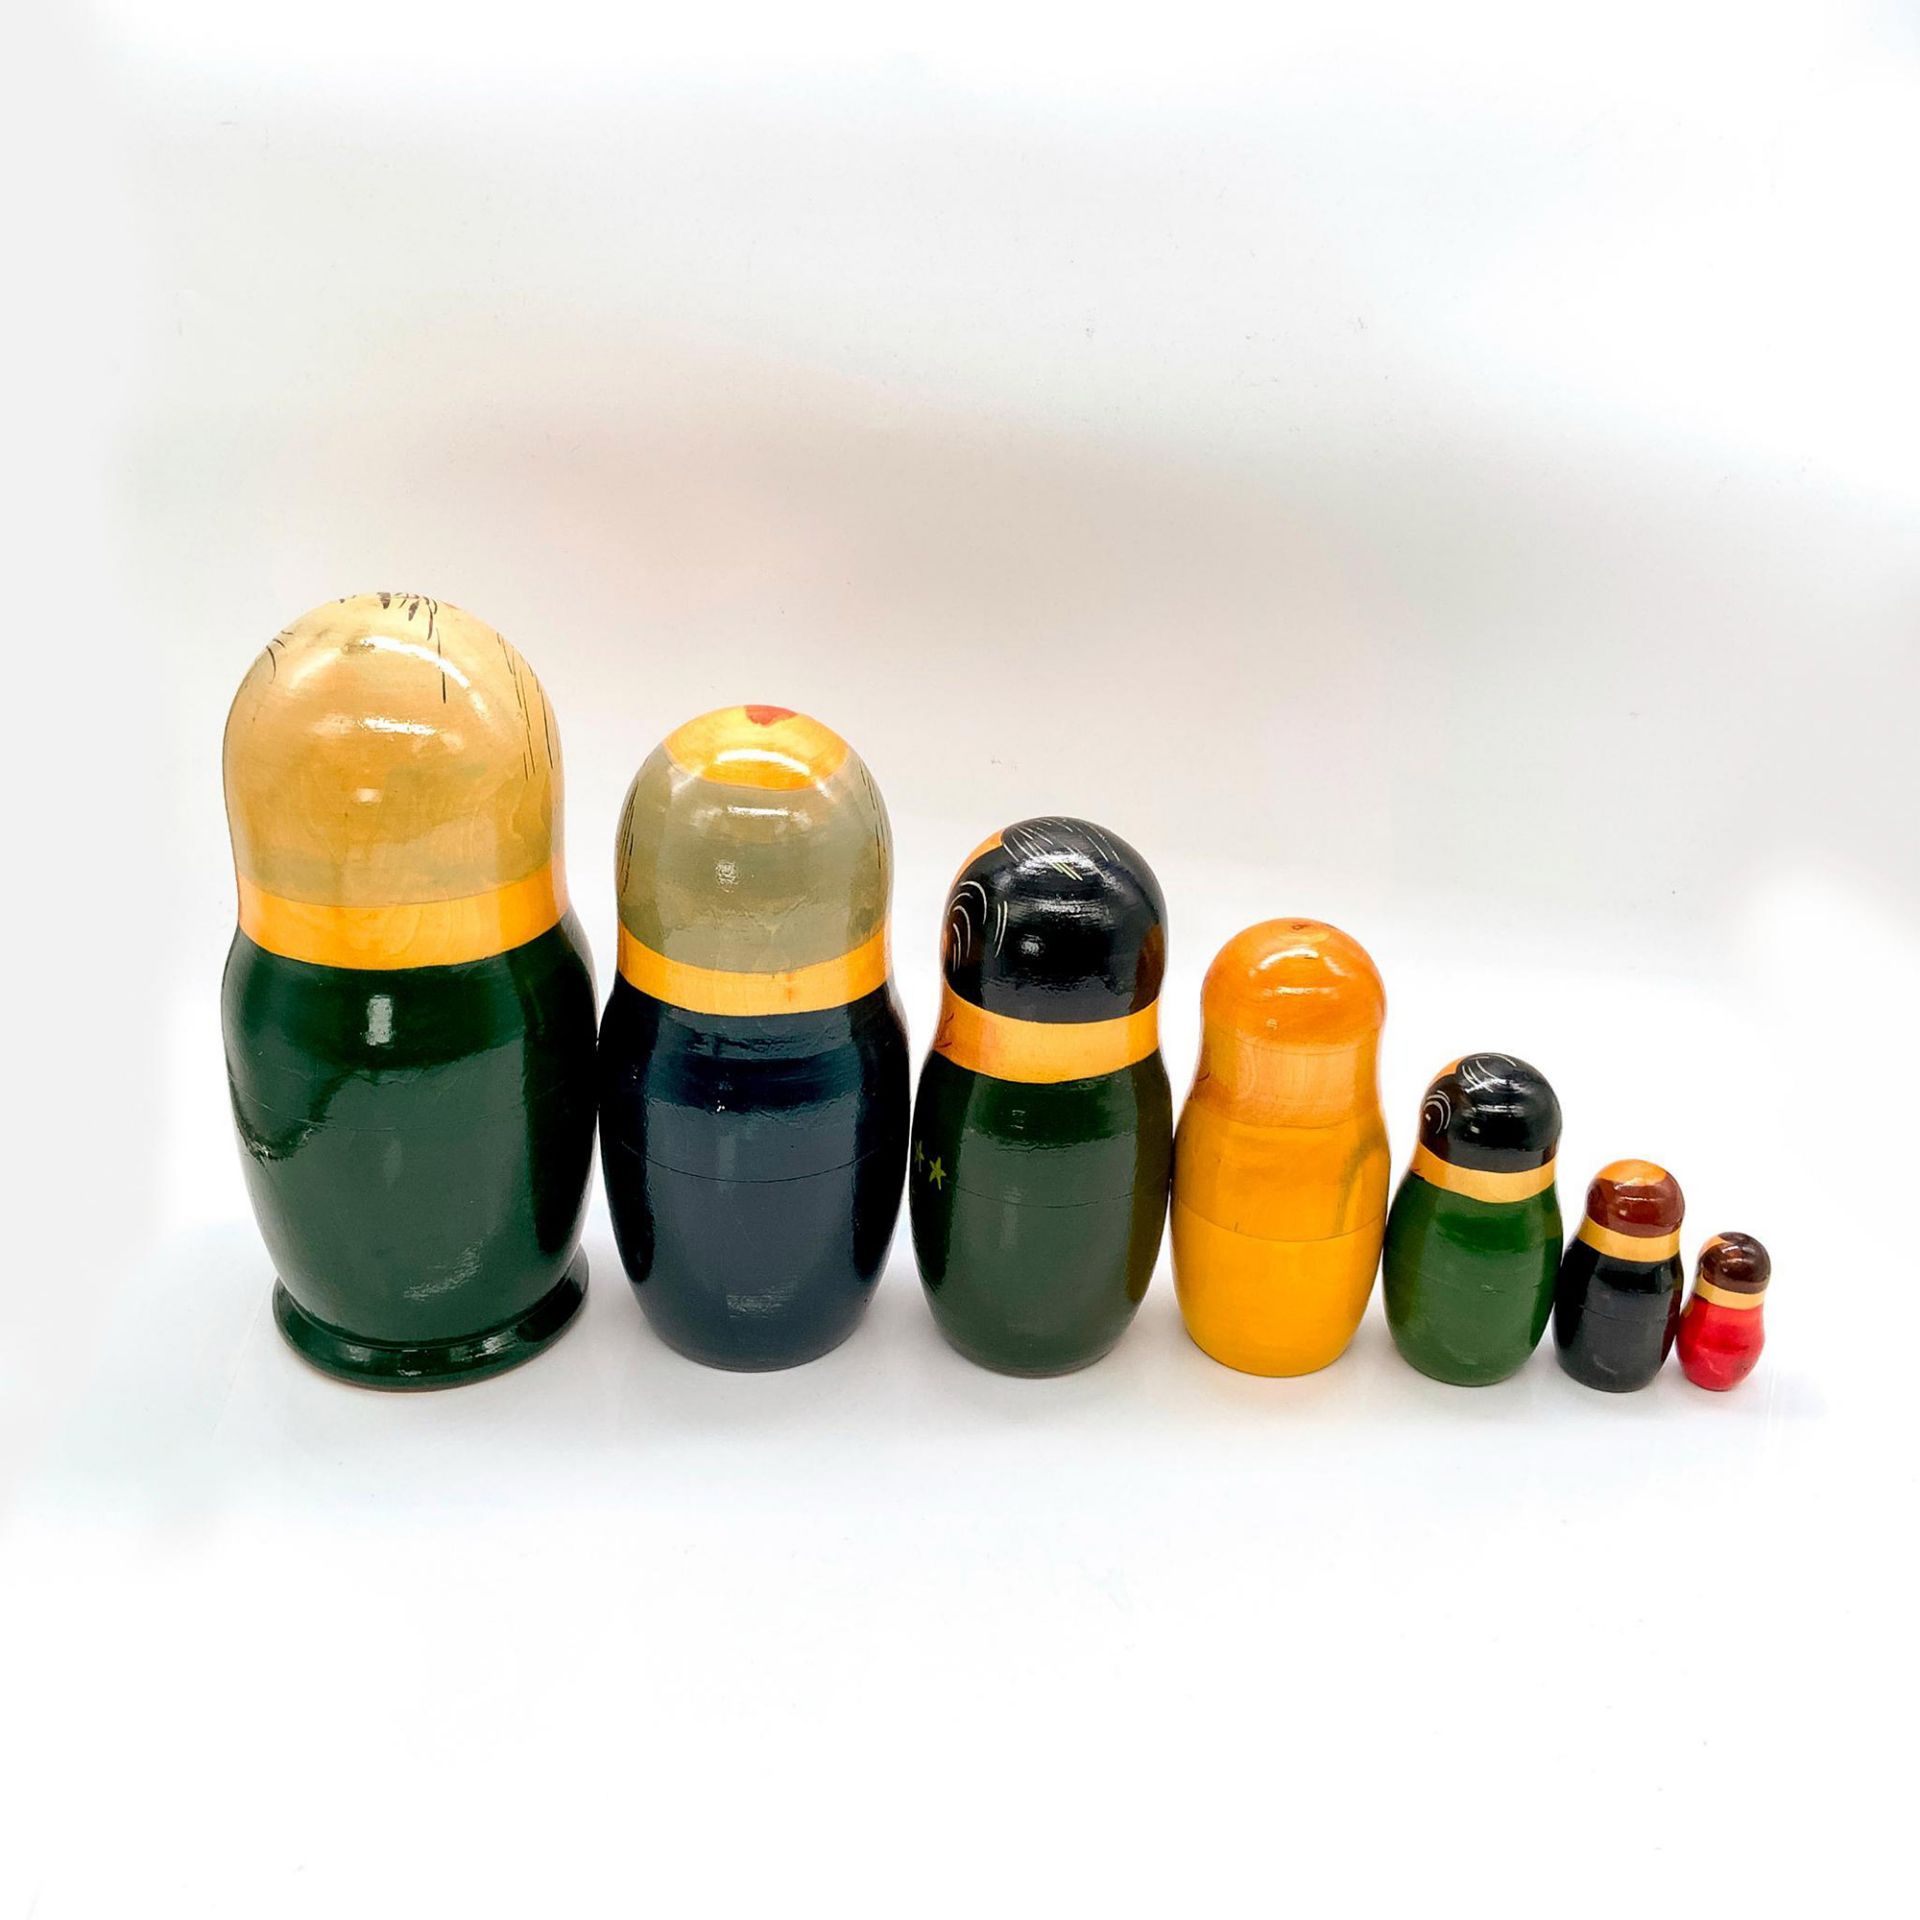 7pc Russian Nesting Dolls Set, Political Leaders - Image 2 of 4